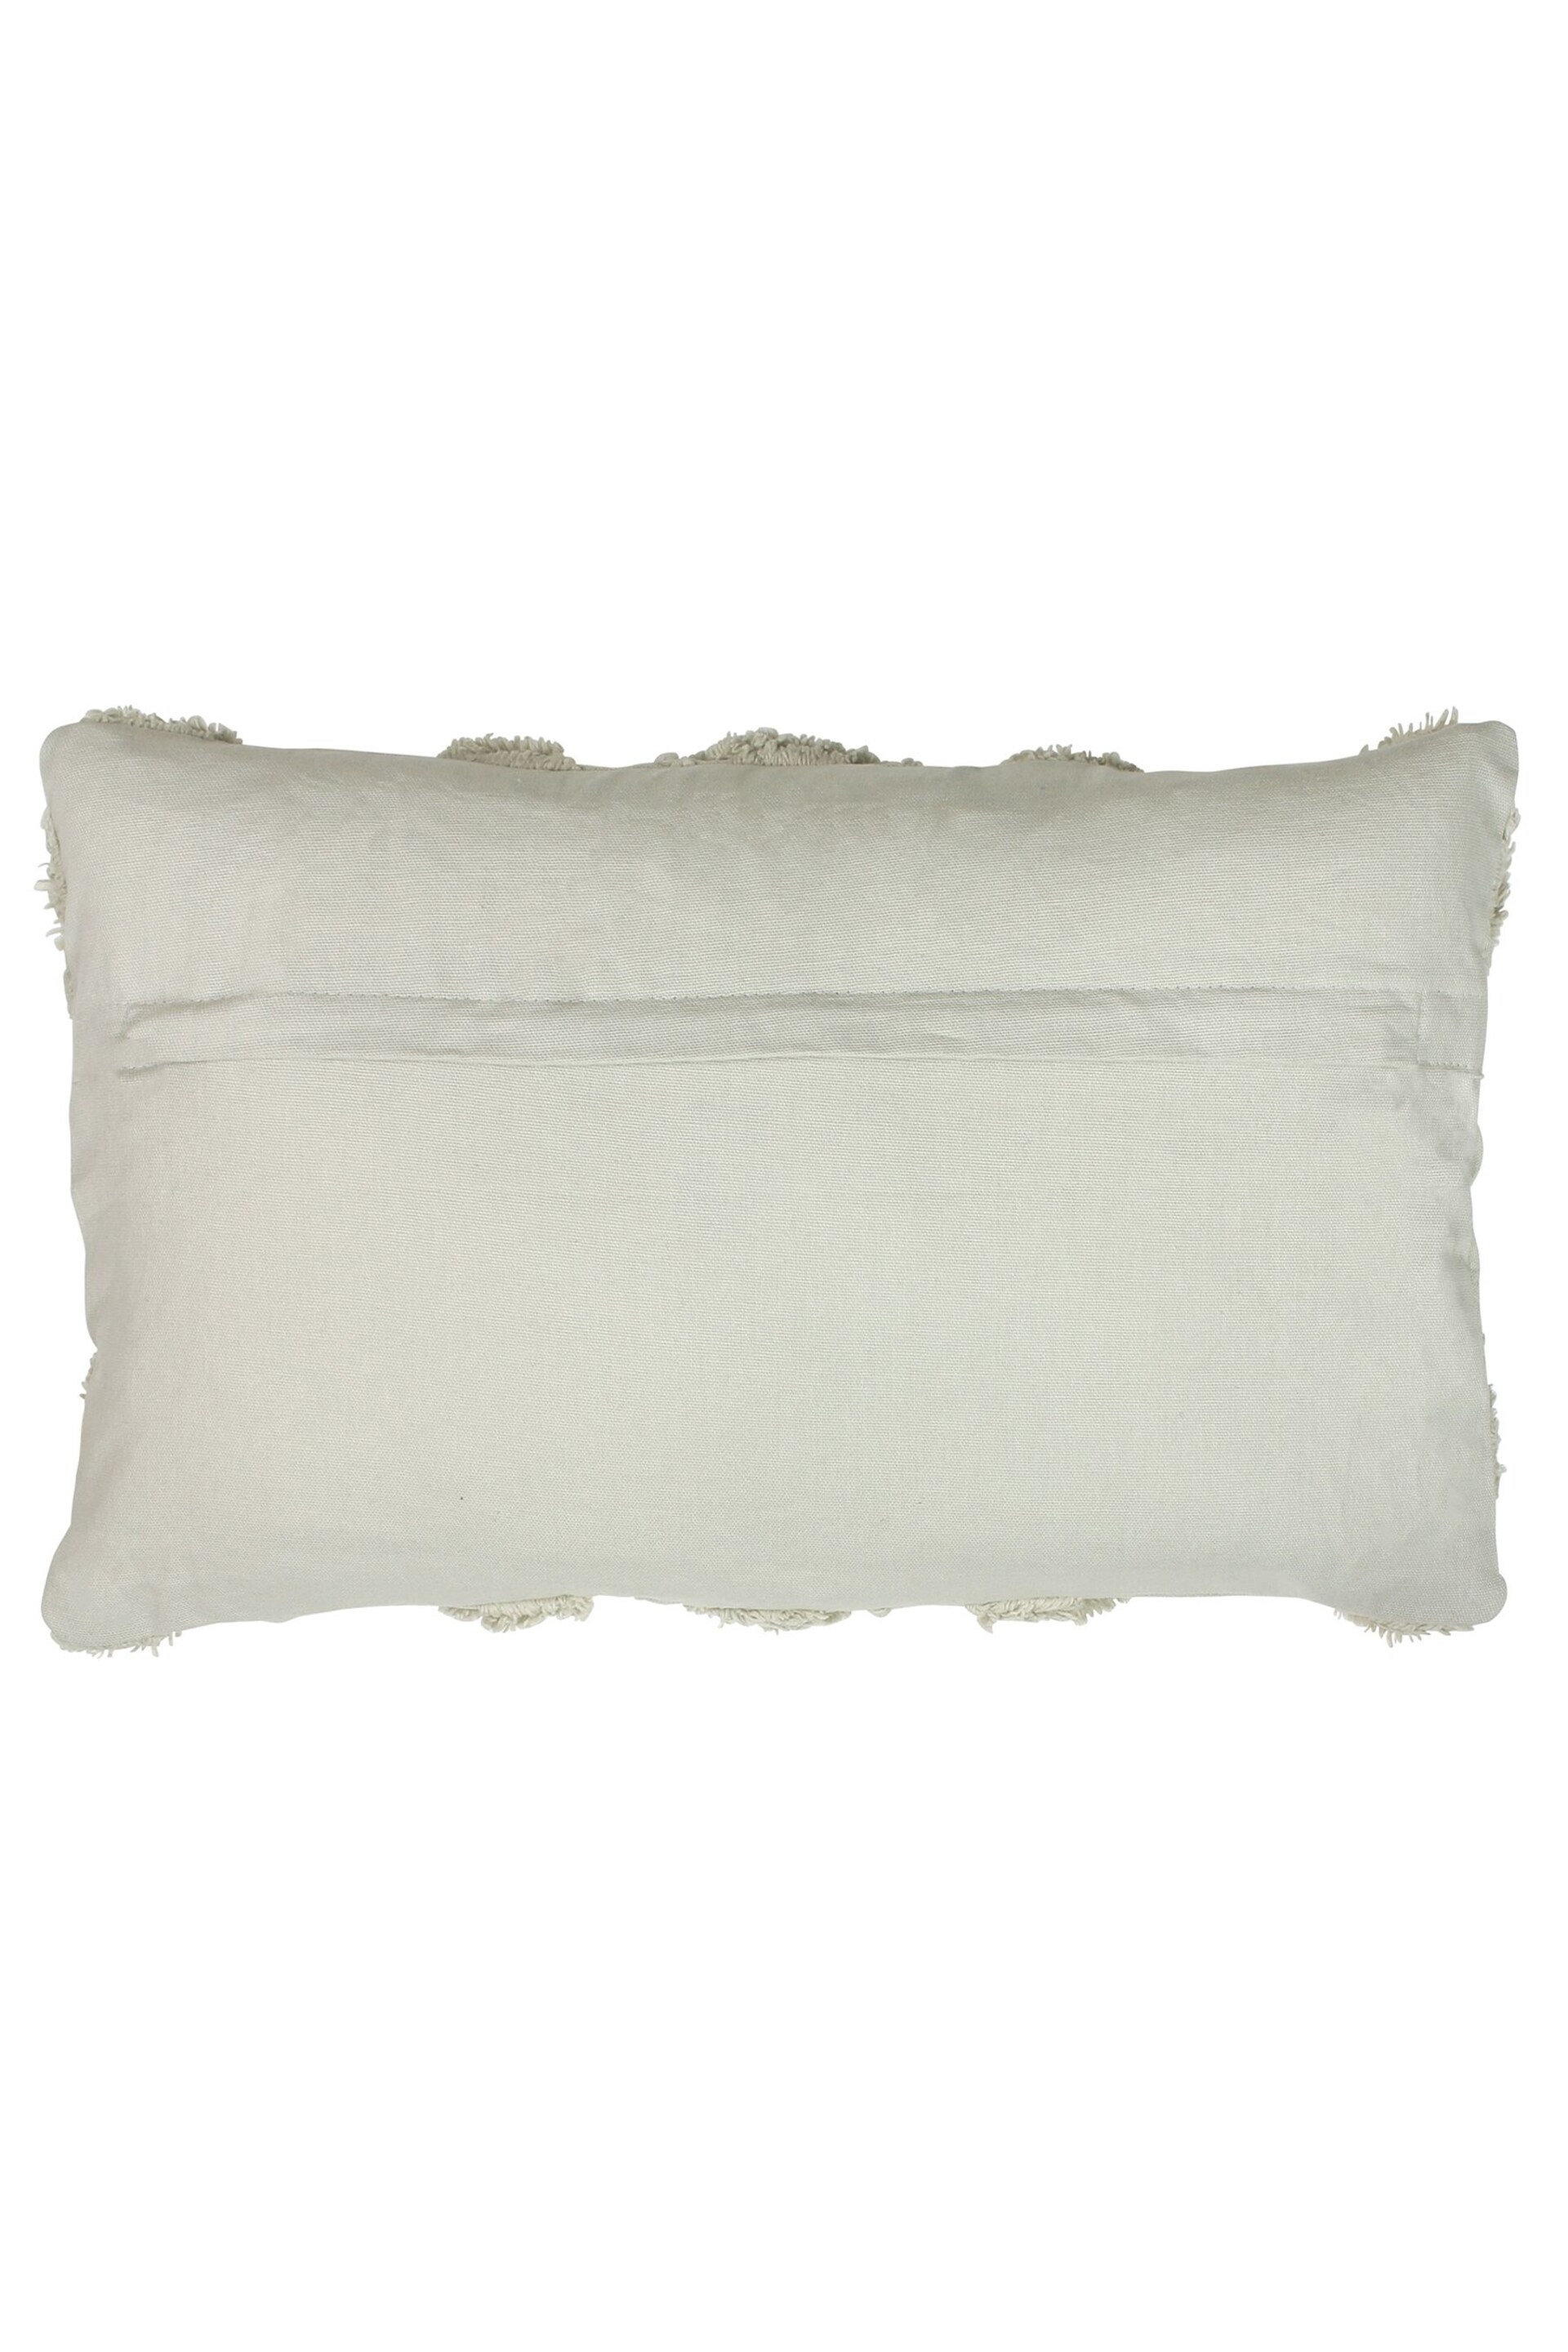 furn. Taupe Grey Orson Tufted Polyester Filled Cushion - Image 2 of 4